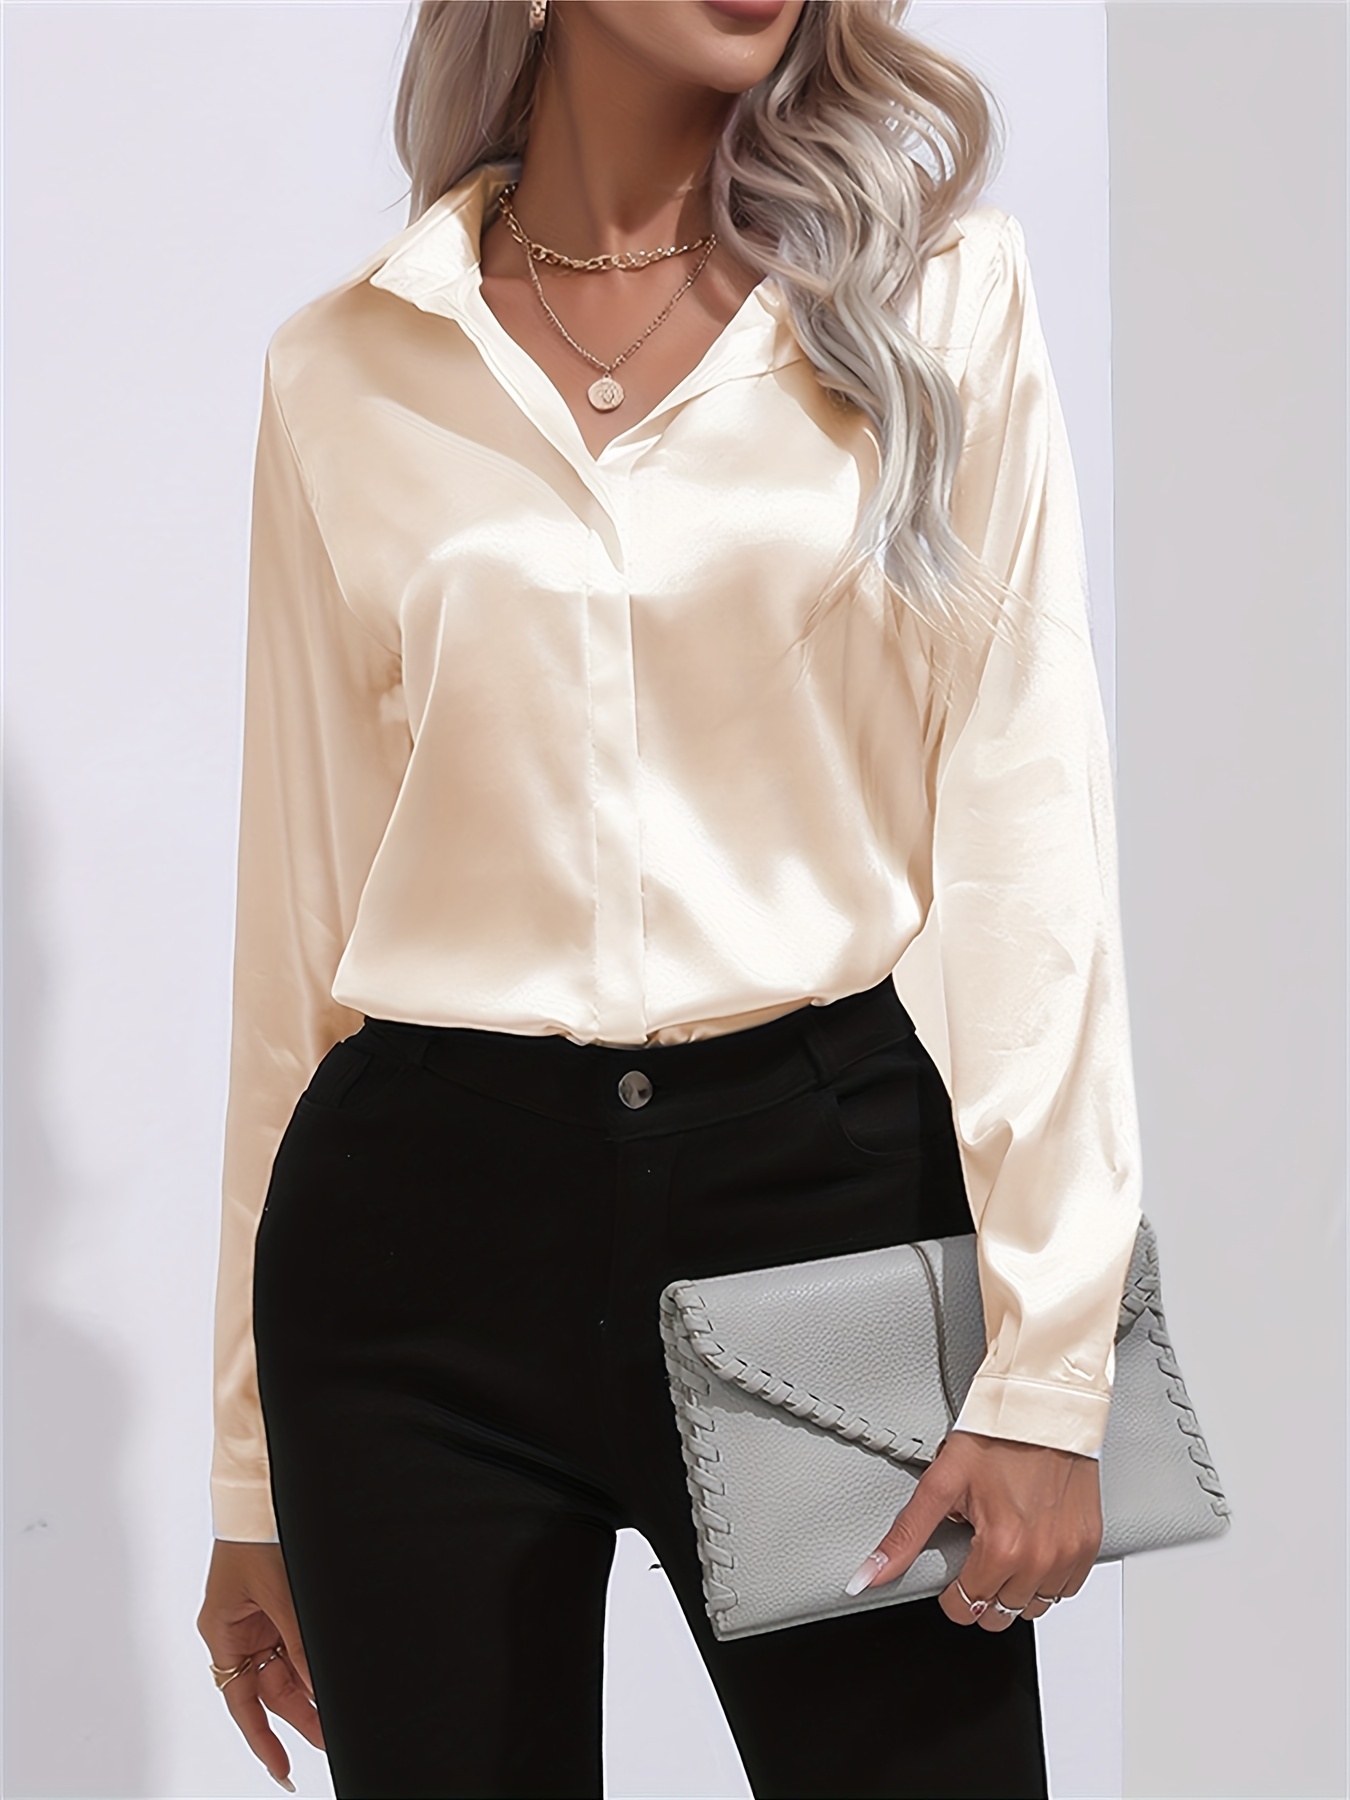 Solid Collar Neck Satin Womens Casual Shirt With Black Corset Belt